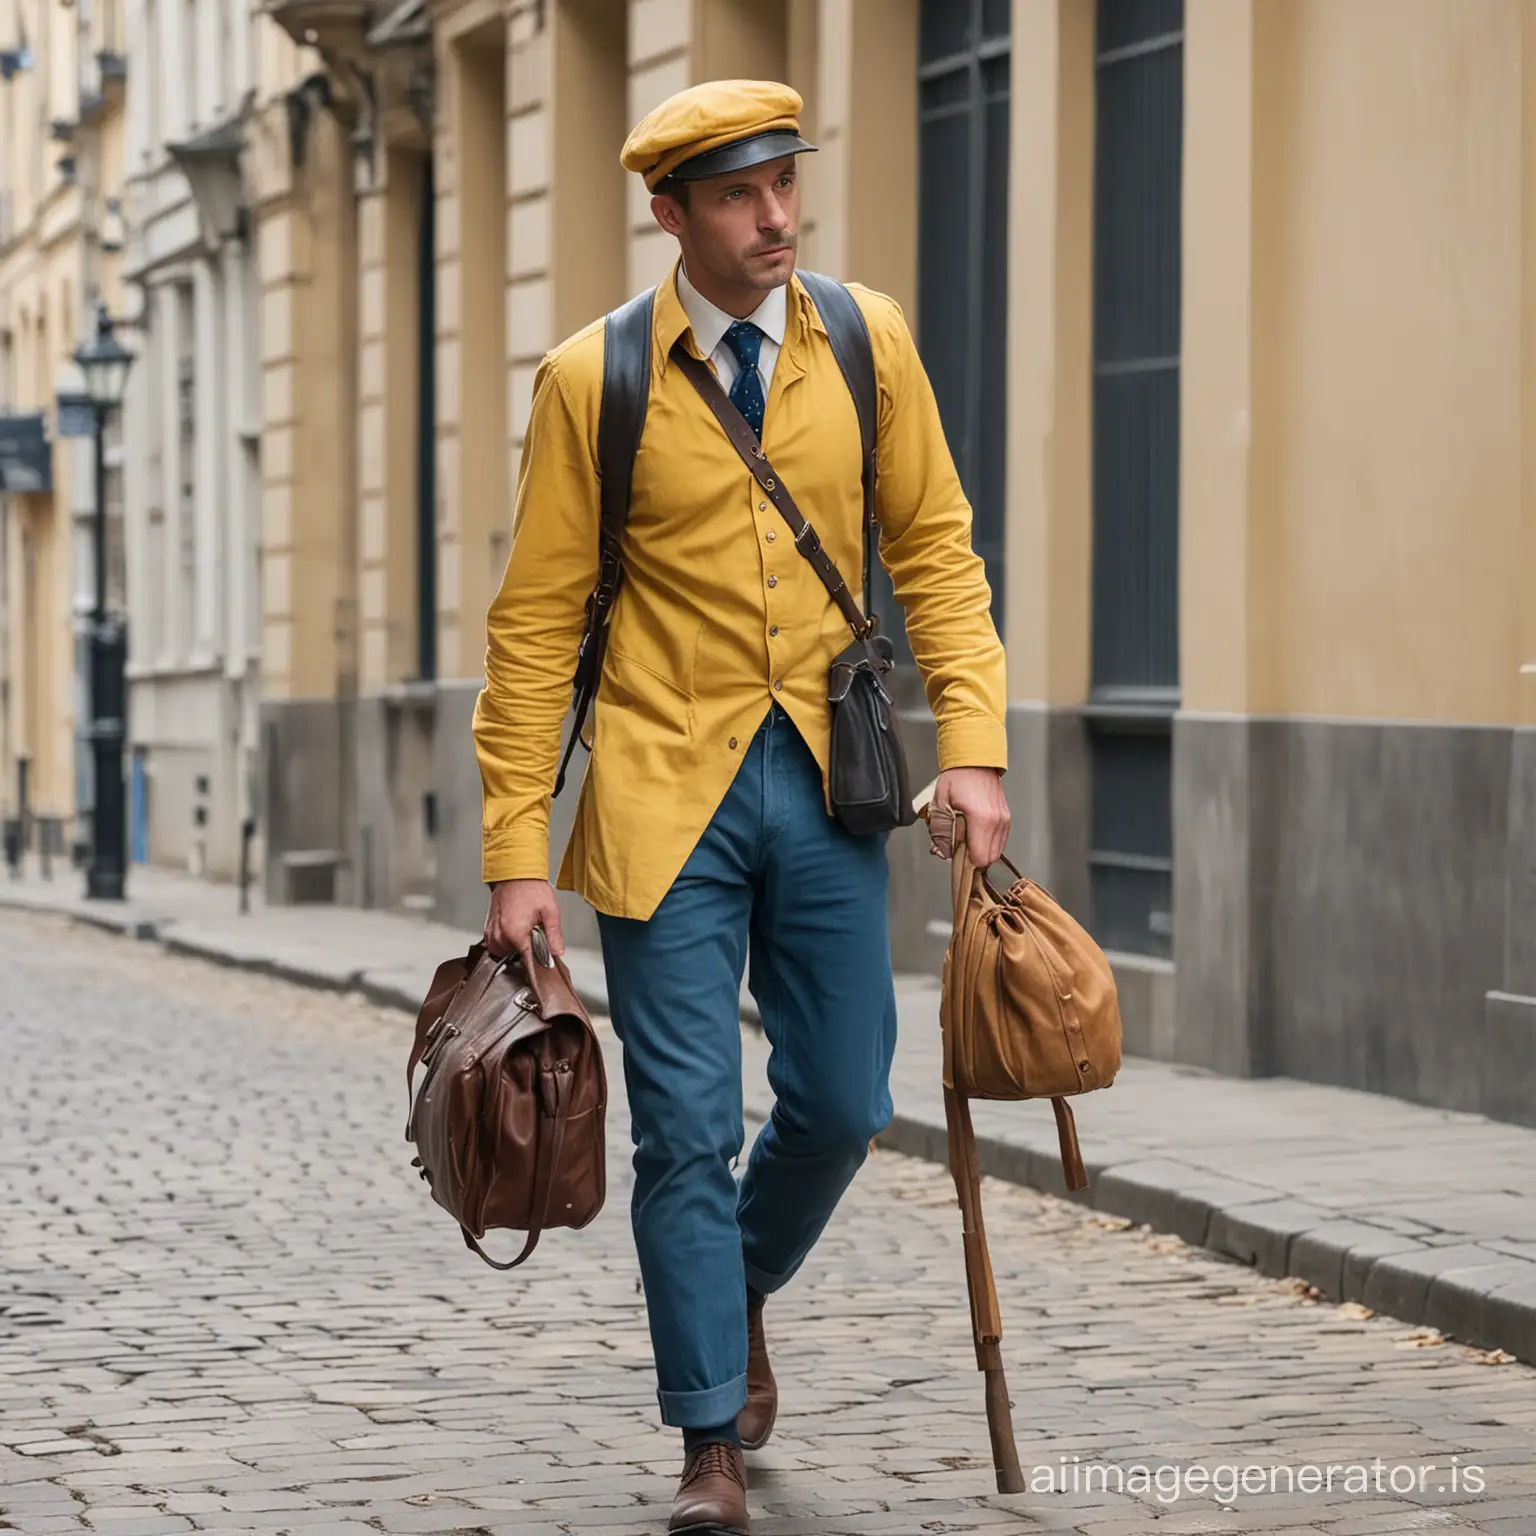 a man of the 19th century is walking in the city, medium height, 50 years old, a leather visor cap, a yellow cotton shirt, a tie, blue trousers with a hole in one knee, a grey blouse, a full soldier's bag on his back, a stick